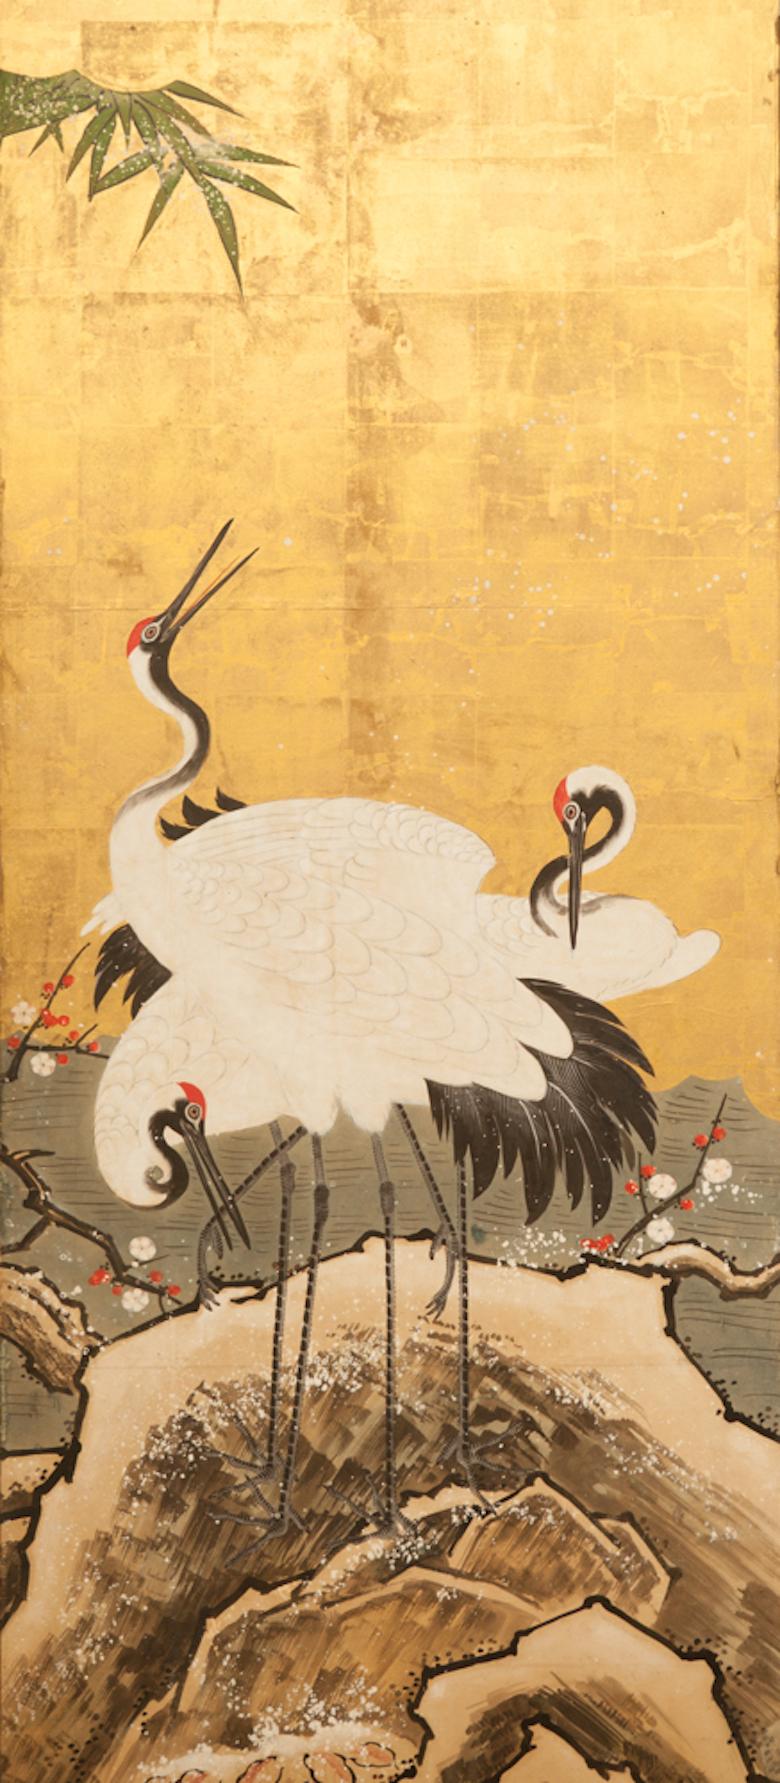 Japanese Six Panel Screen: Snow Scene at Water's Edge with Flowers and Waterfowl.  Edo period painting (mid 19th century) of plum, bamboo, white camellias, cranes and mandarin ducks in a snowy scape with gold leaf clouds.  Kano School painting in